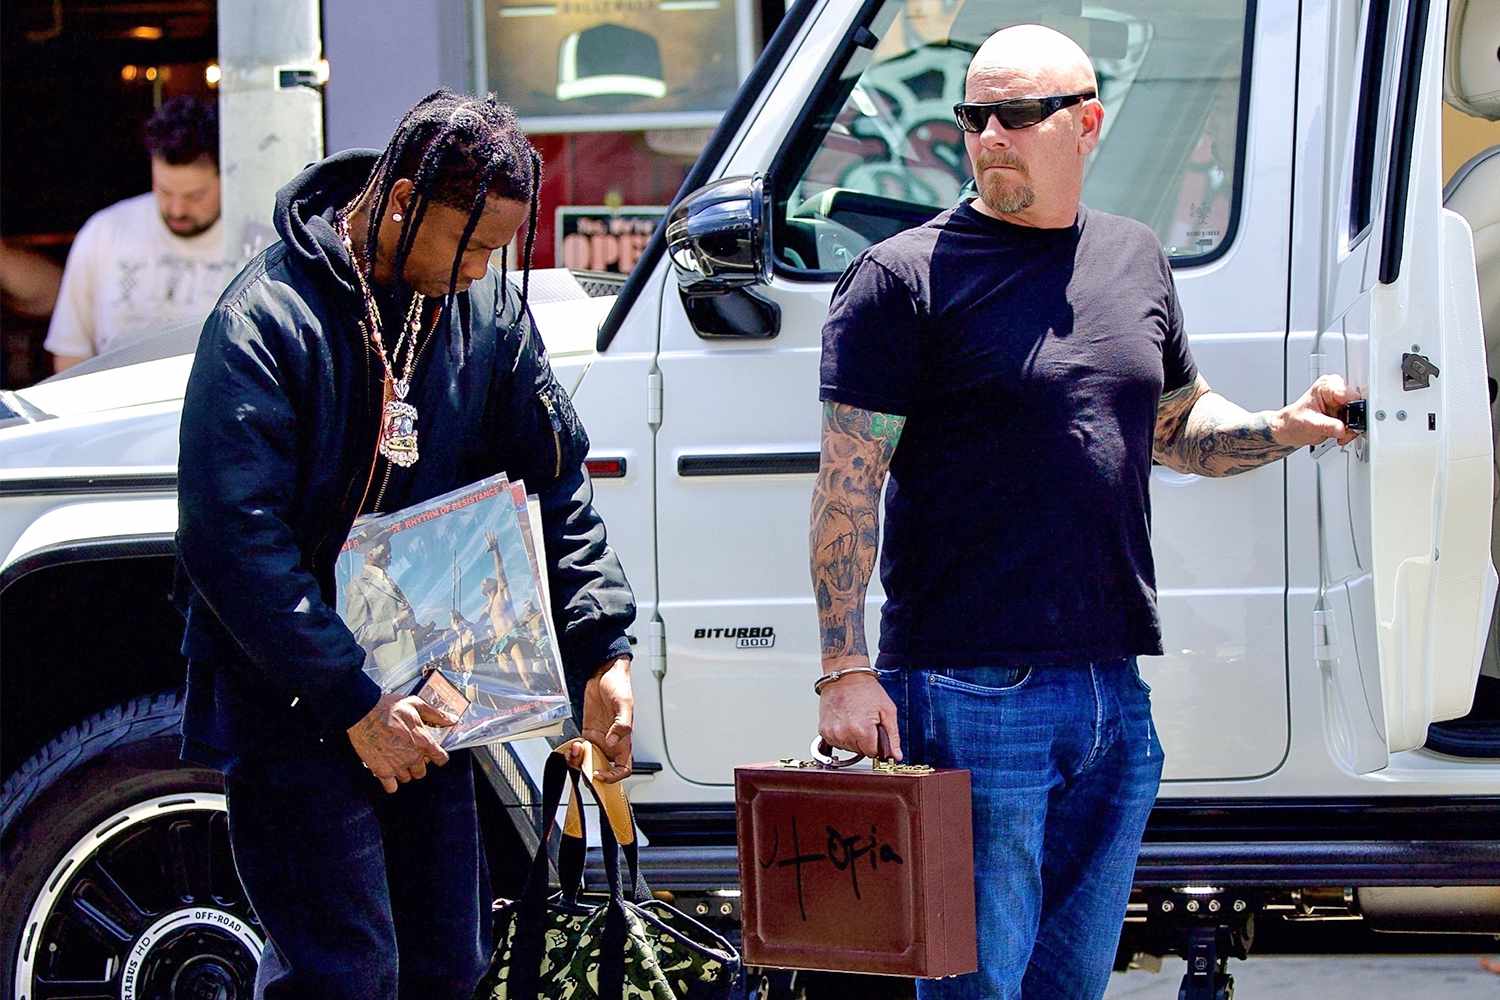 Travis Scott Bodyguard Holds 'Utopia' Briefcase Handcuffed to His Arm